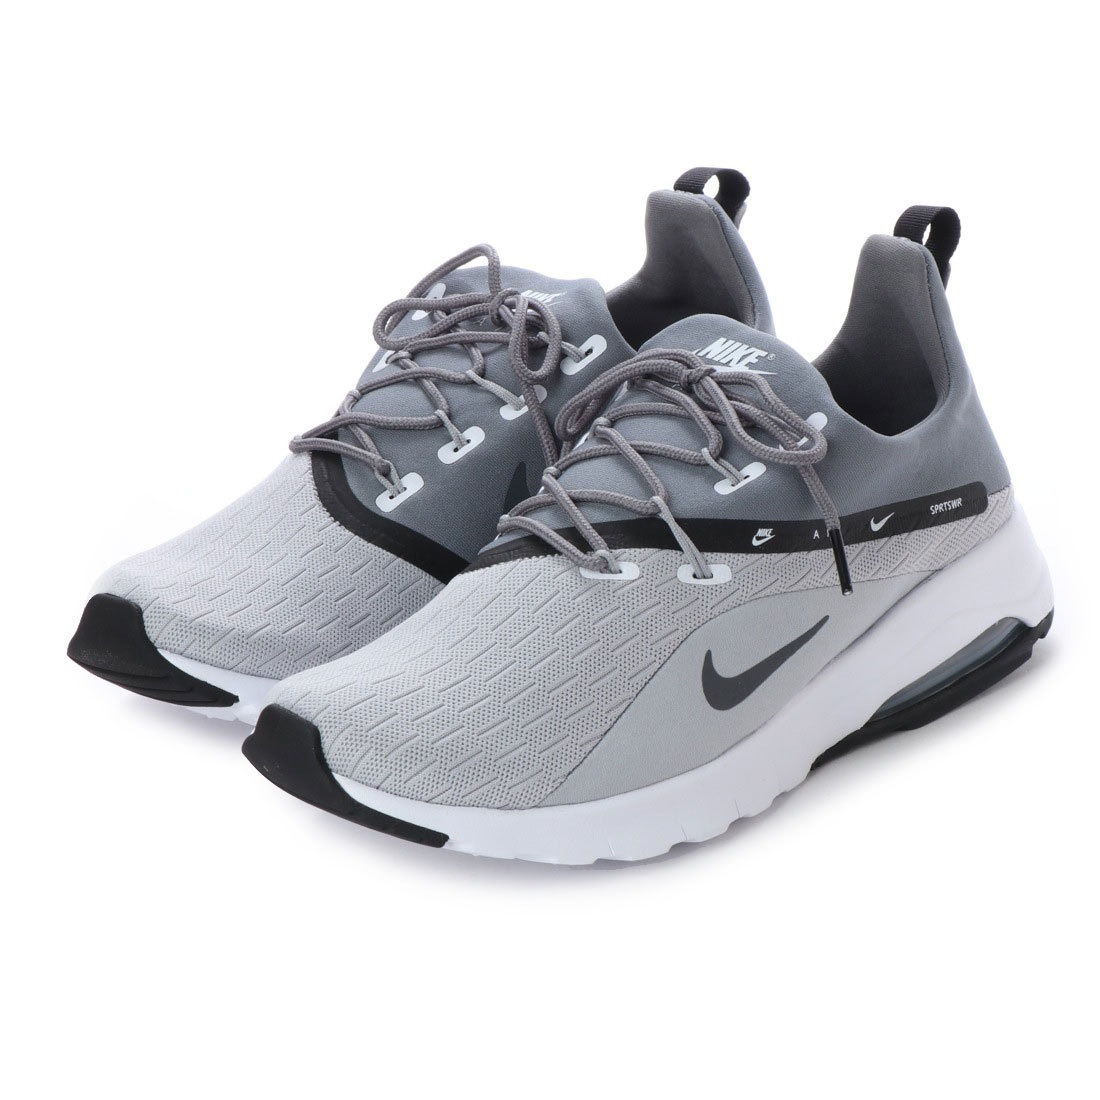 nike men's air max motion racer running shoes